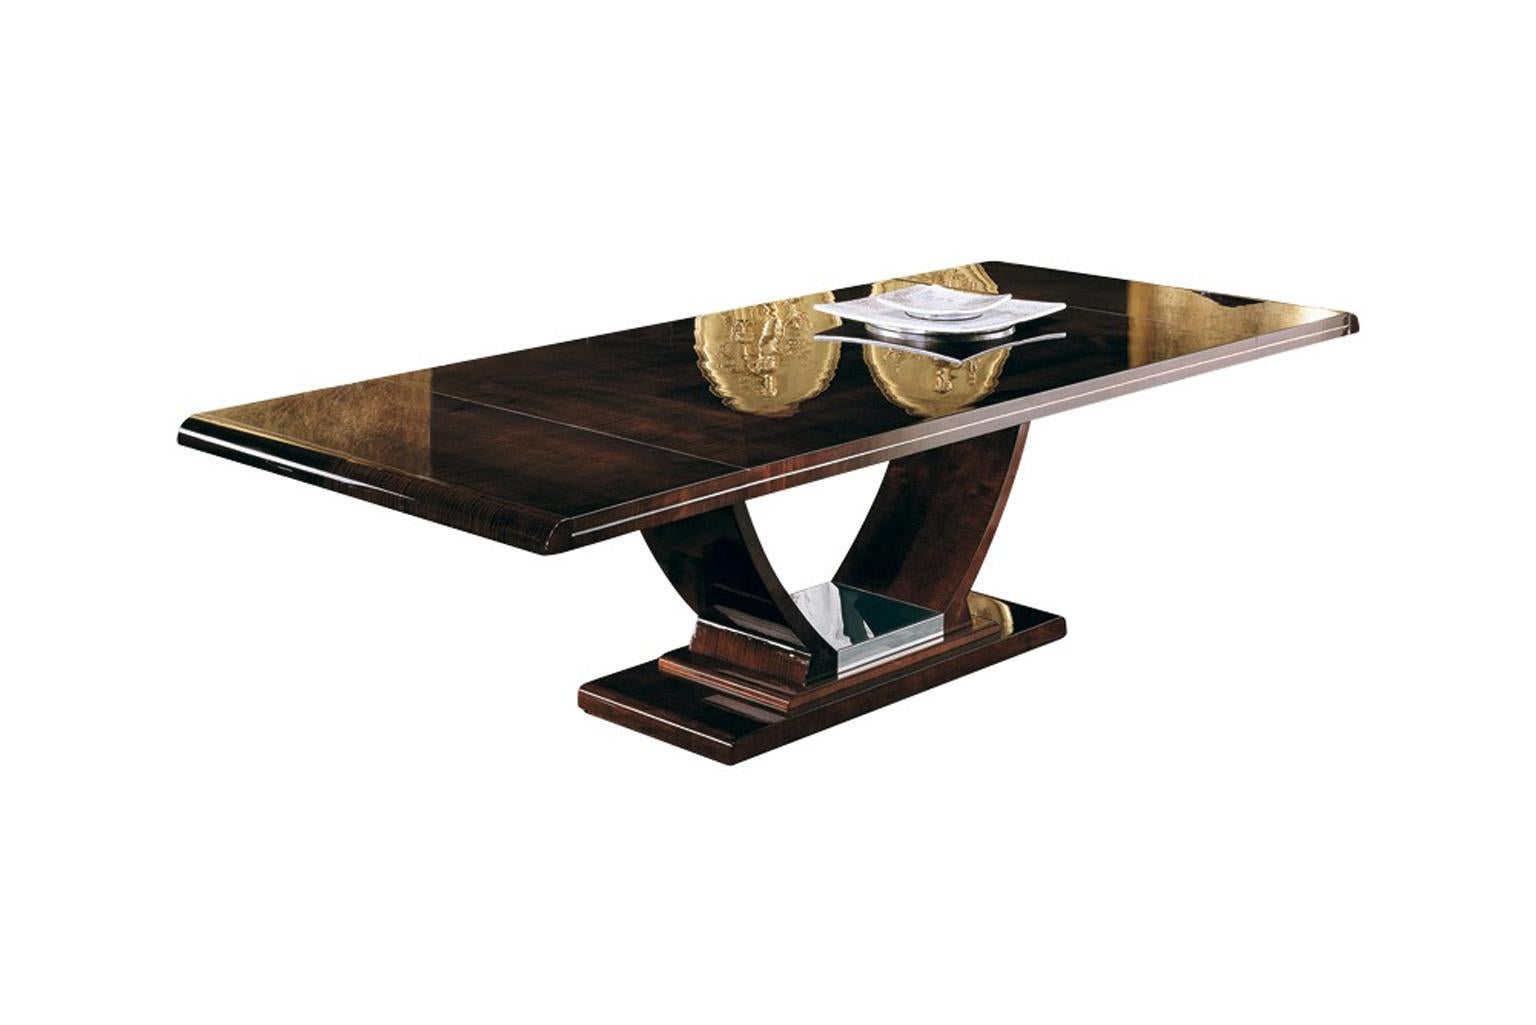 Rectangular table with two extension of cm 48 (19”) with top in ash-burl inlay and curly sycamore veneer in high gloss polyester, finish in dark moka tone and polished stainless steel chrome base.
77” L x 46” W x 30” H (closed)
113” L x 46” W x 30”